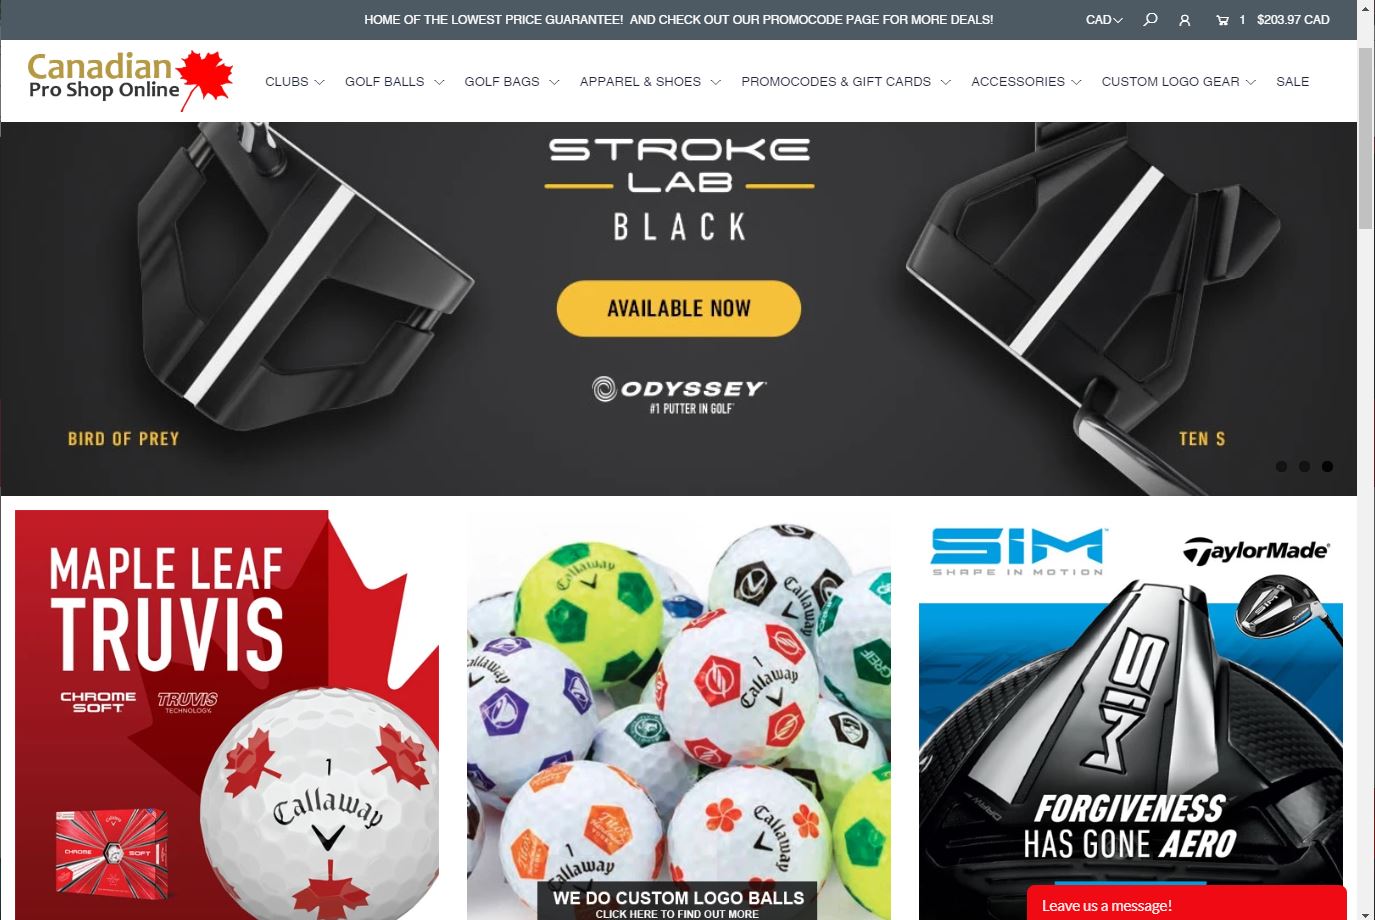 Shop for Great Golf Gear at our partner canadianproshoponline